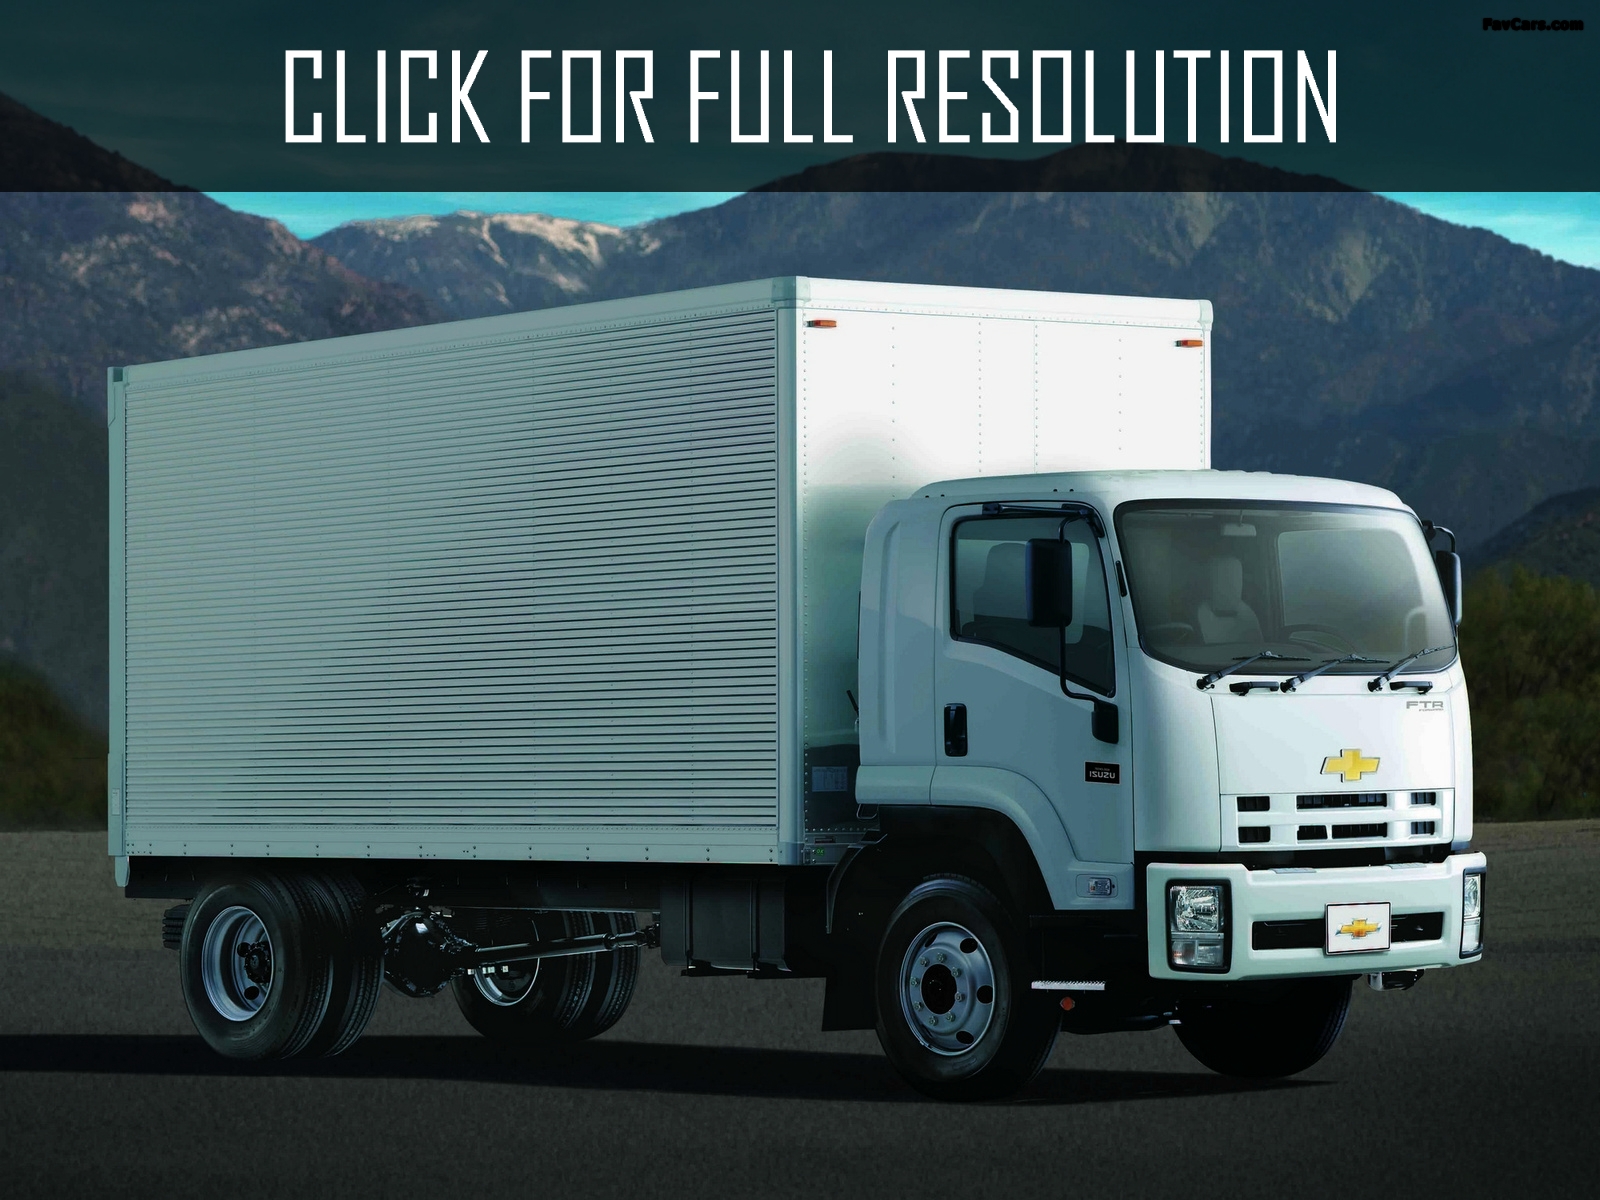 Chevrolet Ftr amazing photo gallery, some information and